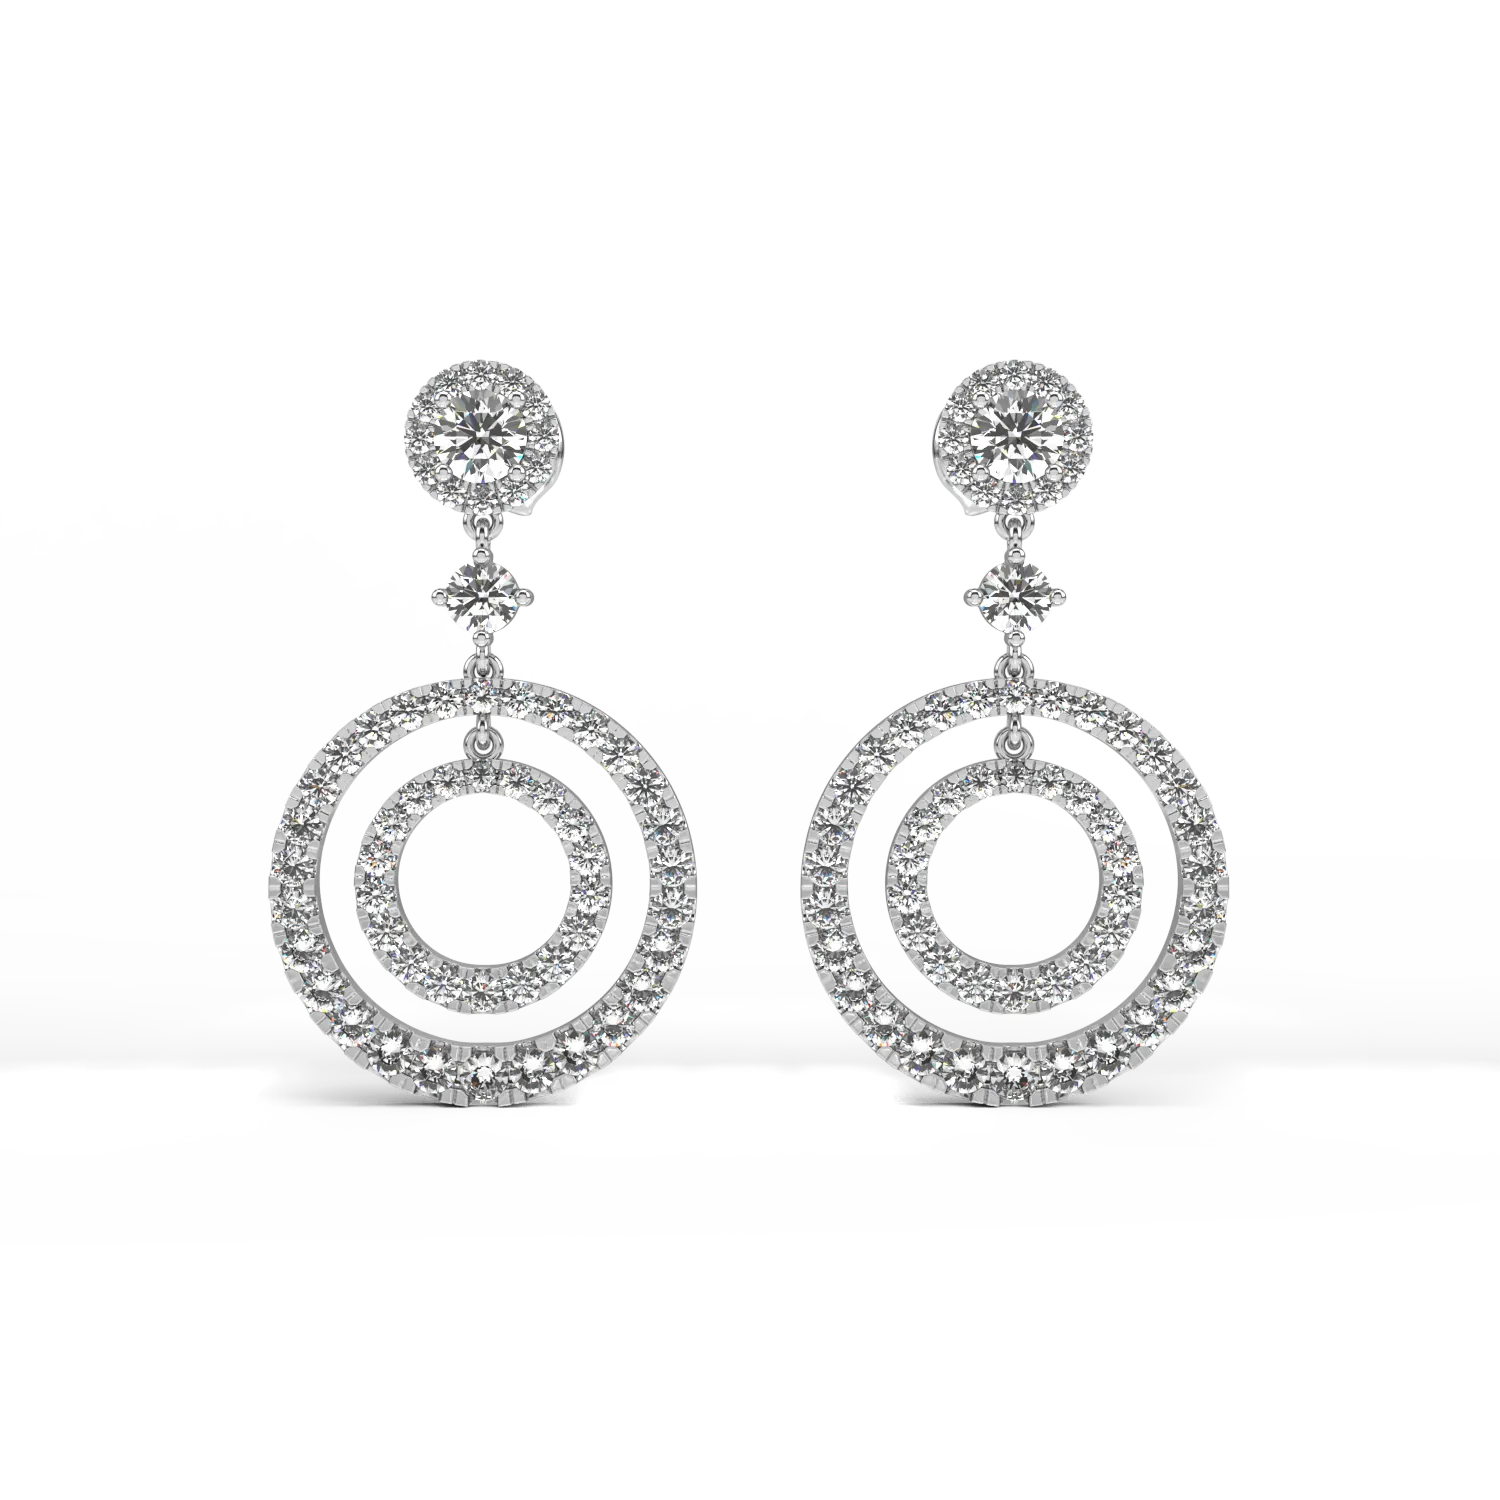 18K white gold earrings with 2.035ct diamonds